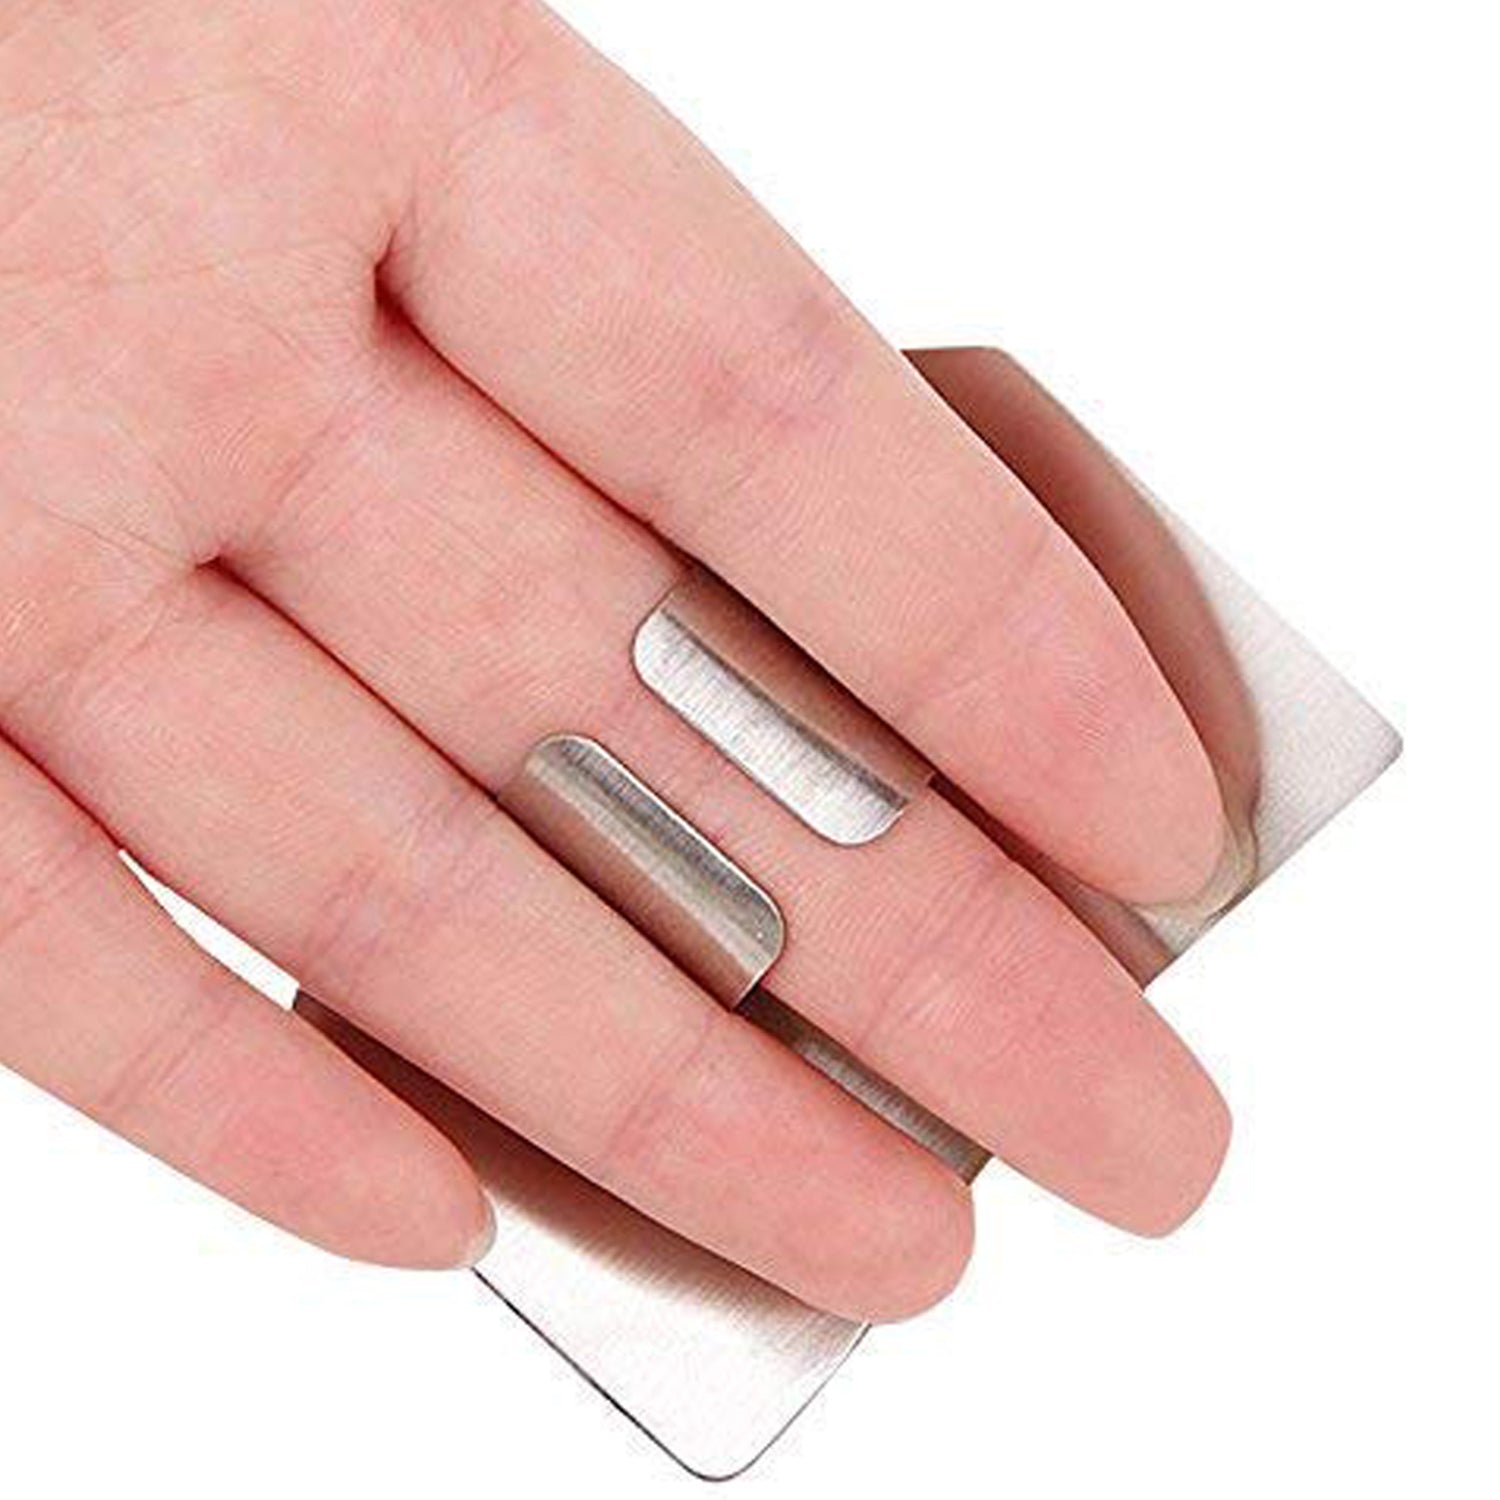 2265A Stainless Steel Two Finger Grip Cutting Protector Hand Guard DeoDap